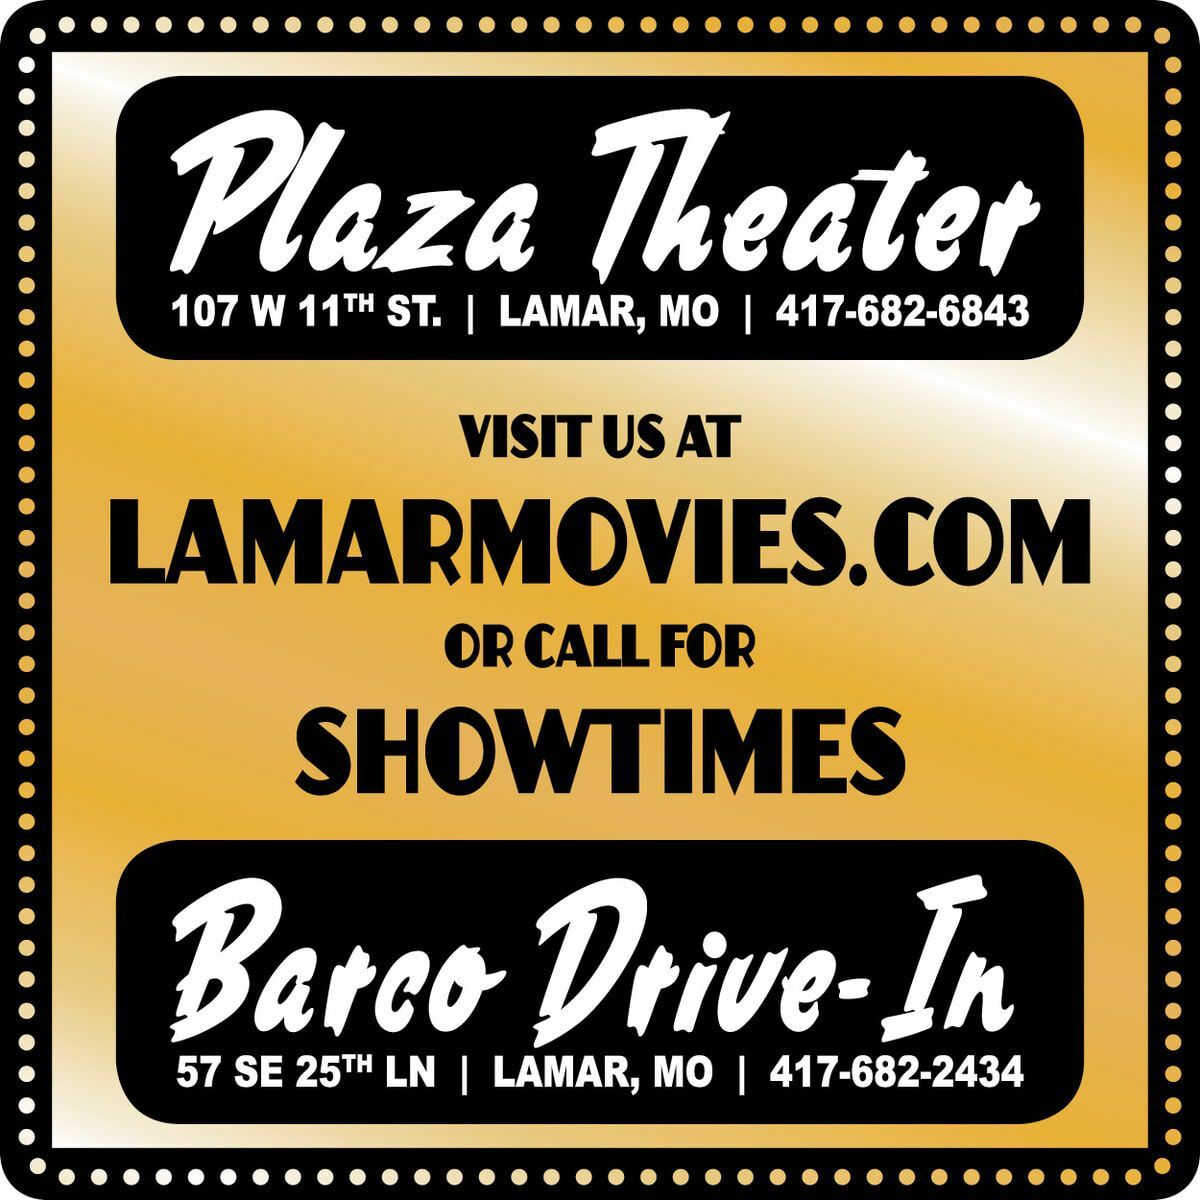 Plaza Theater & Barco Drive-In